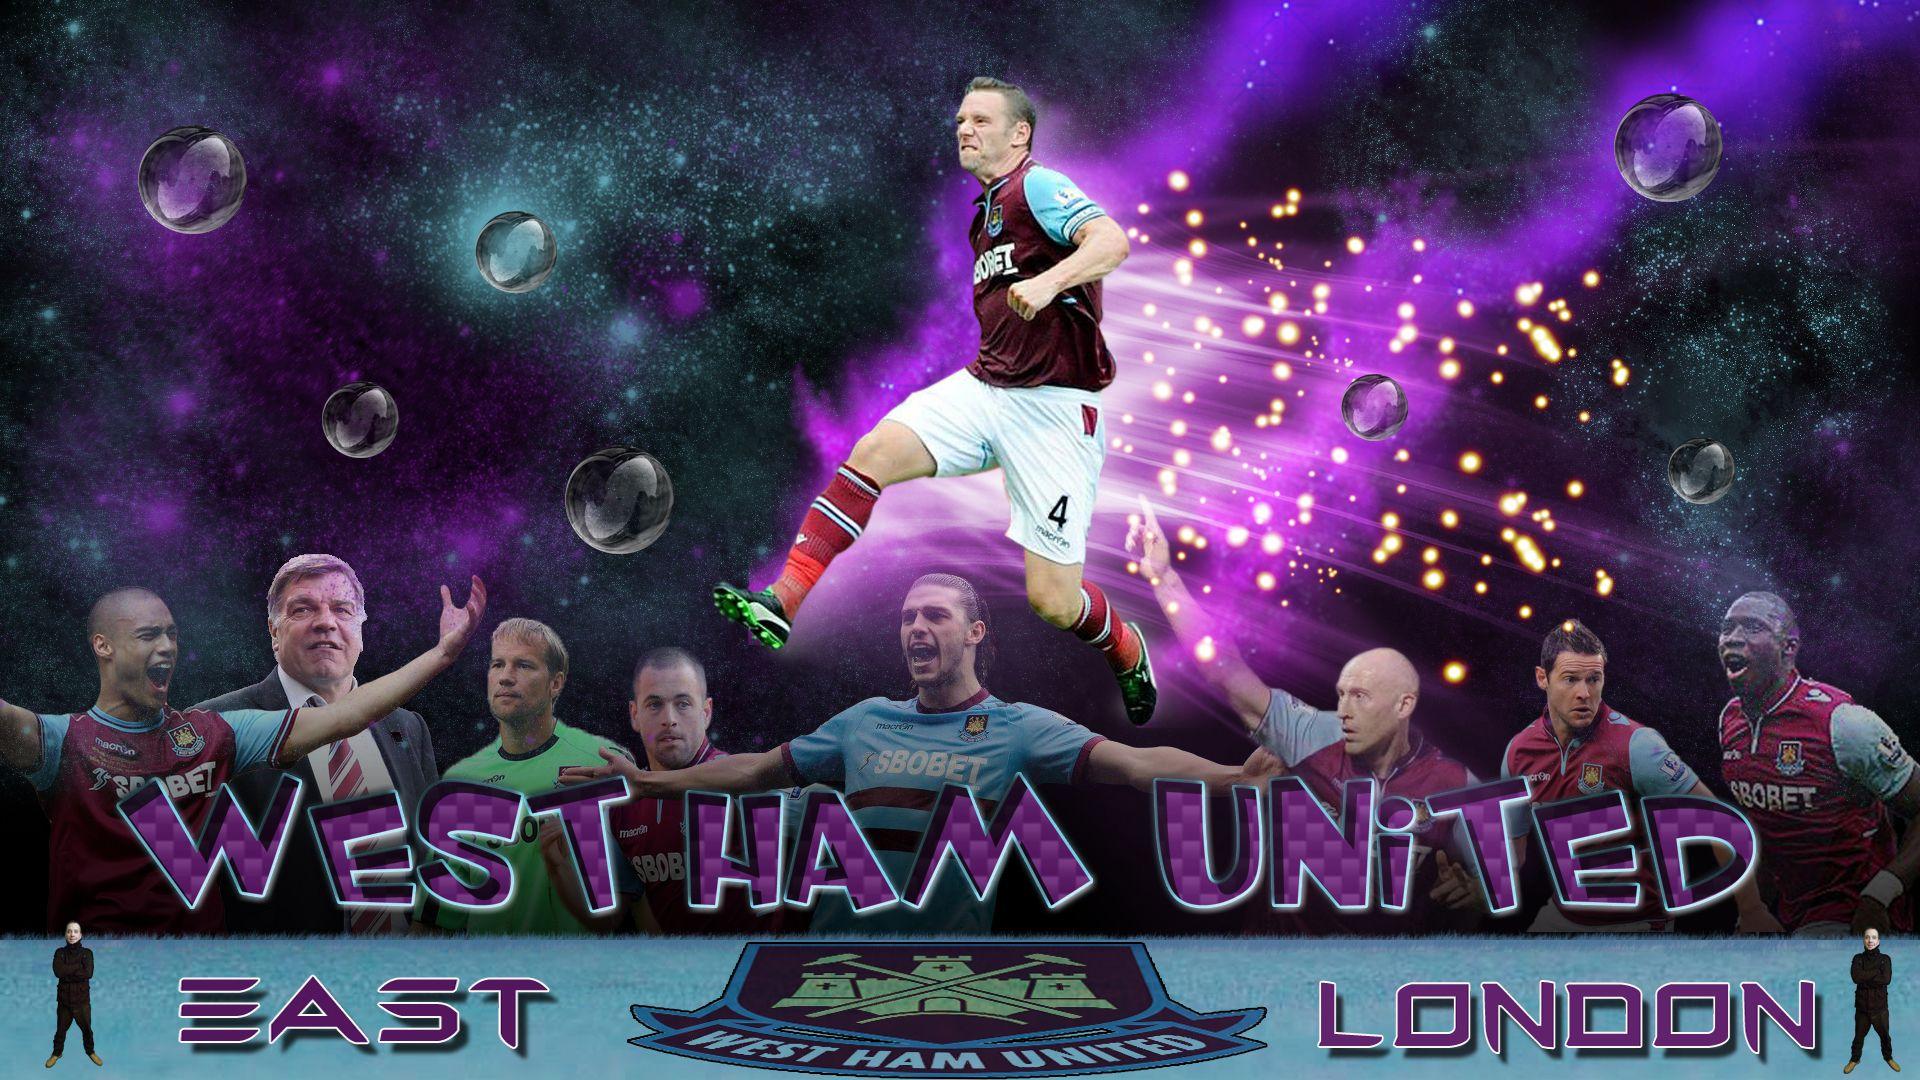 The beloved football club West Ham united wallpaper and image